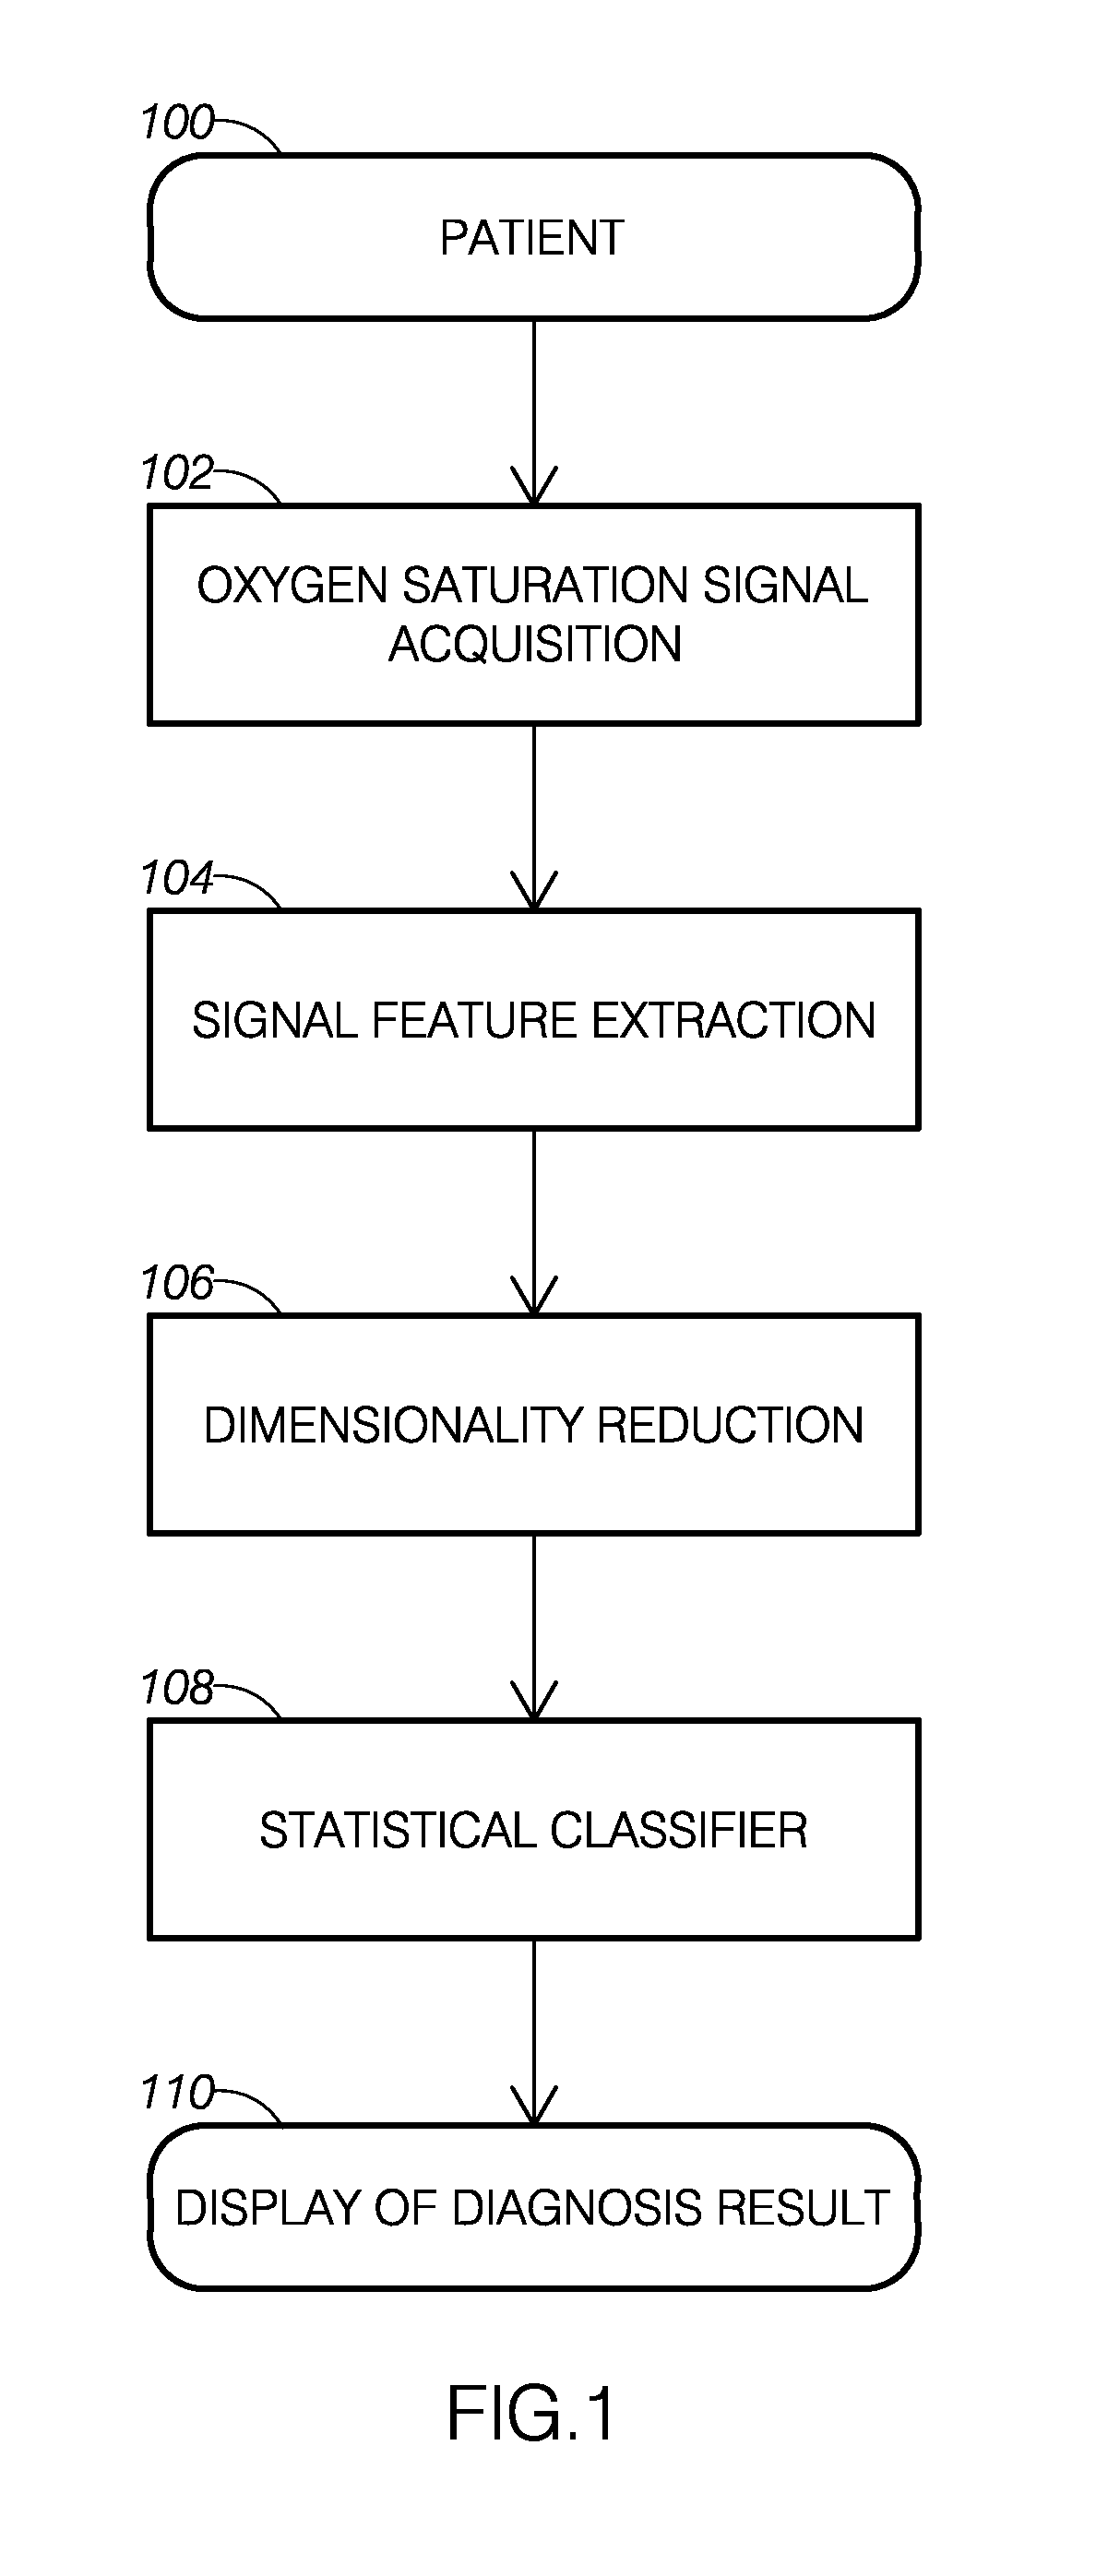 Method, System, and Apparatus for Automatic Detection of Obstructive Sleep Apnea from Oxygen Saturation Recordings